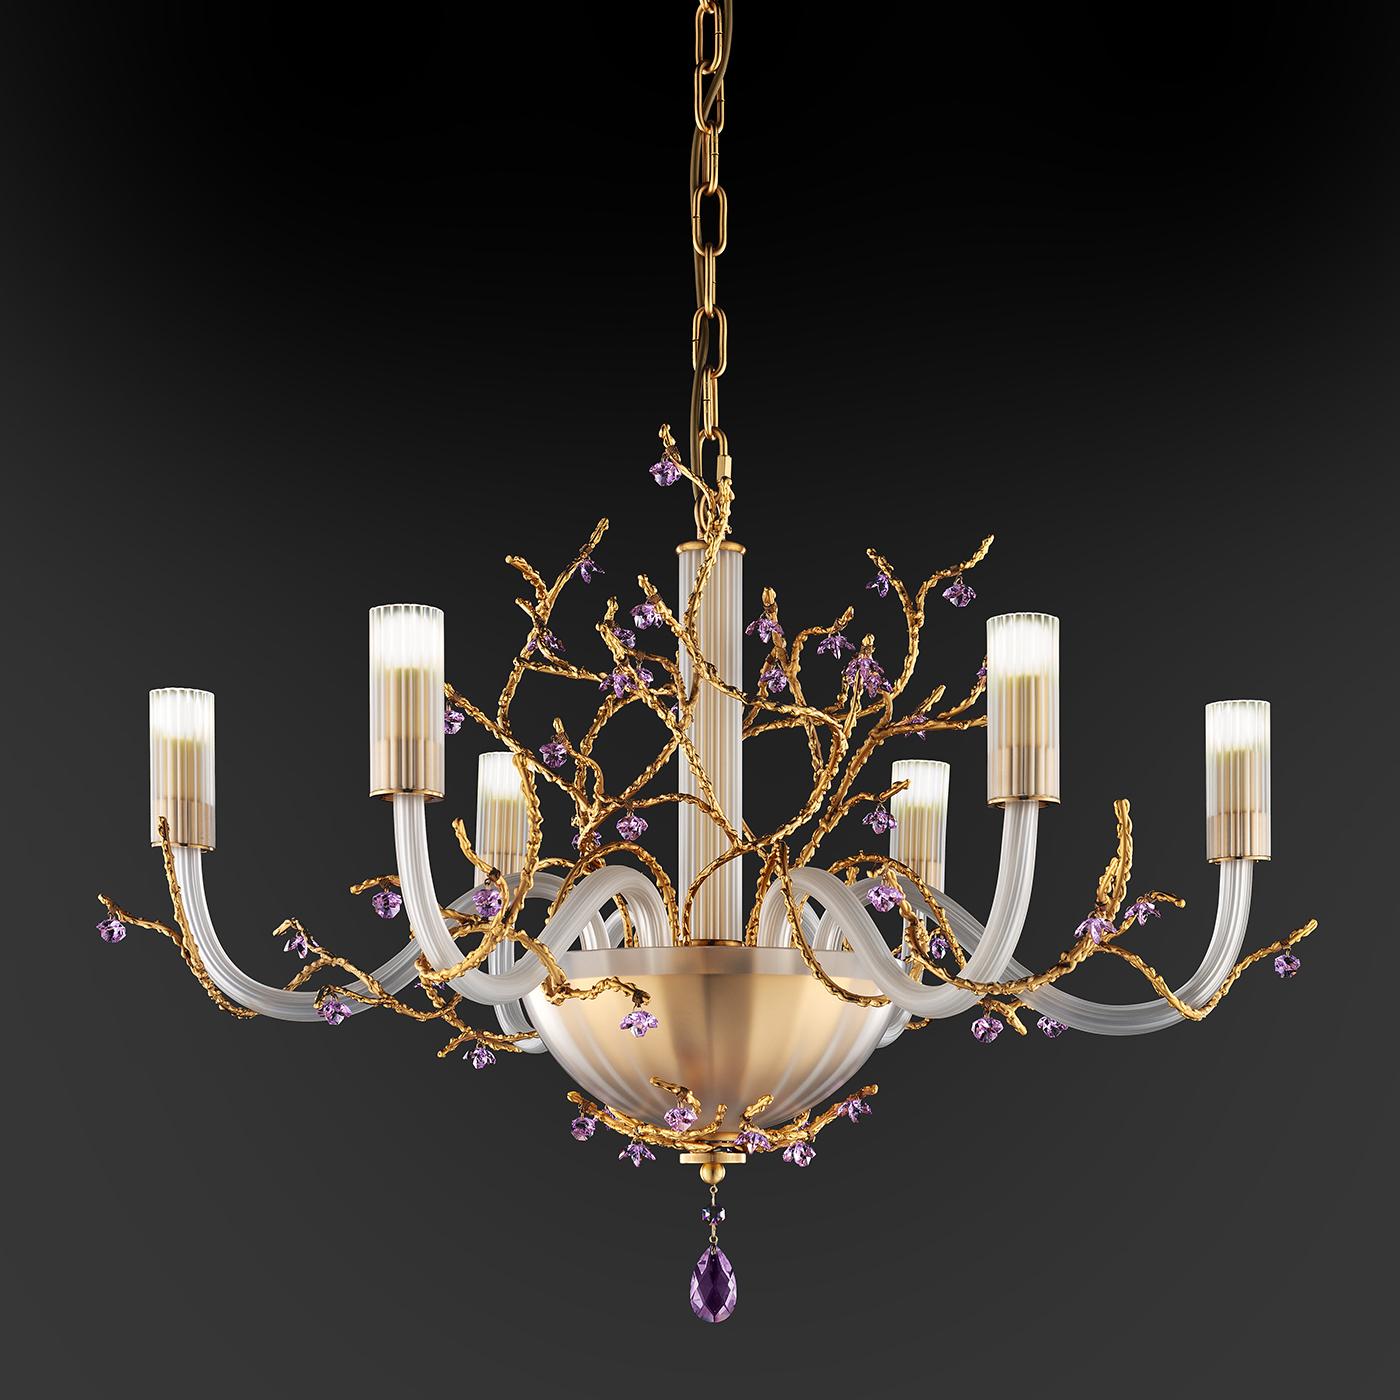 Hanami, meaning cherry blossom viewing, is the Japanese tradition of enjoying the charm and splendour of cherry trees blooming in spring. This chandelier is finished in satin gold, Ral brown Senegal, metallic lillac. Available colors, Rosaline